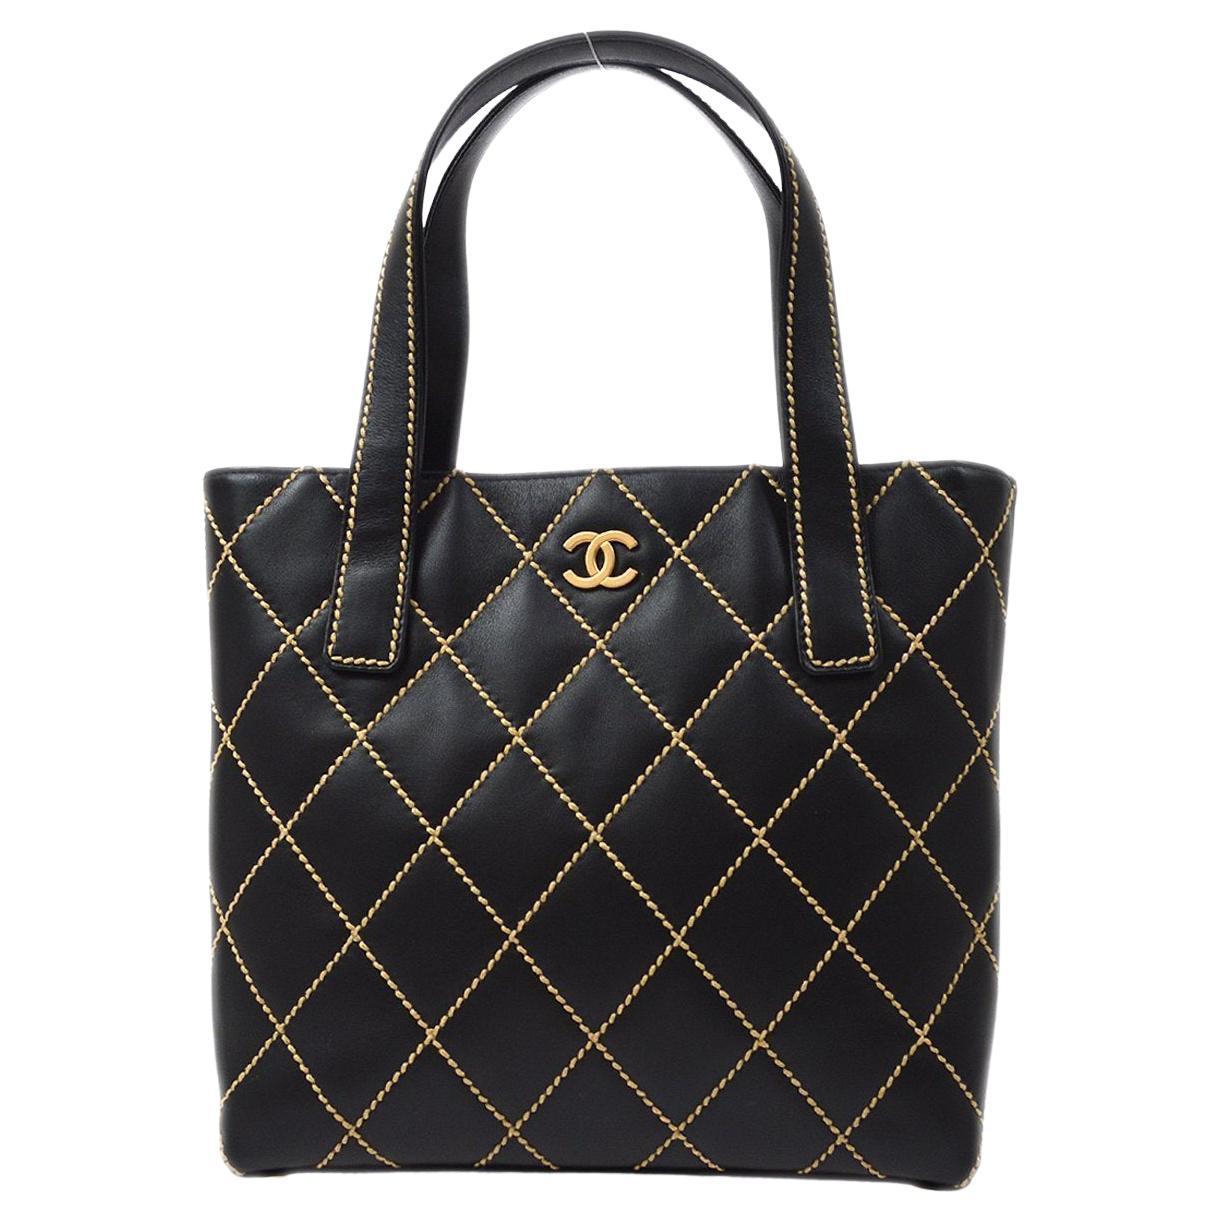 CHANEL Black Calfskin Leather Gold CC Stitch Top Handle Evening Tote Bag